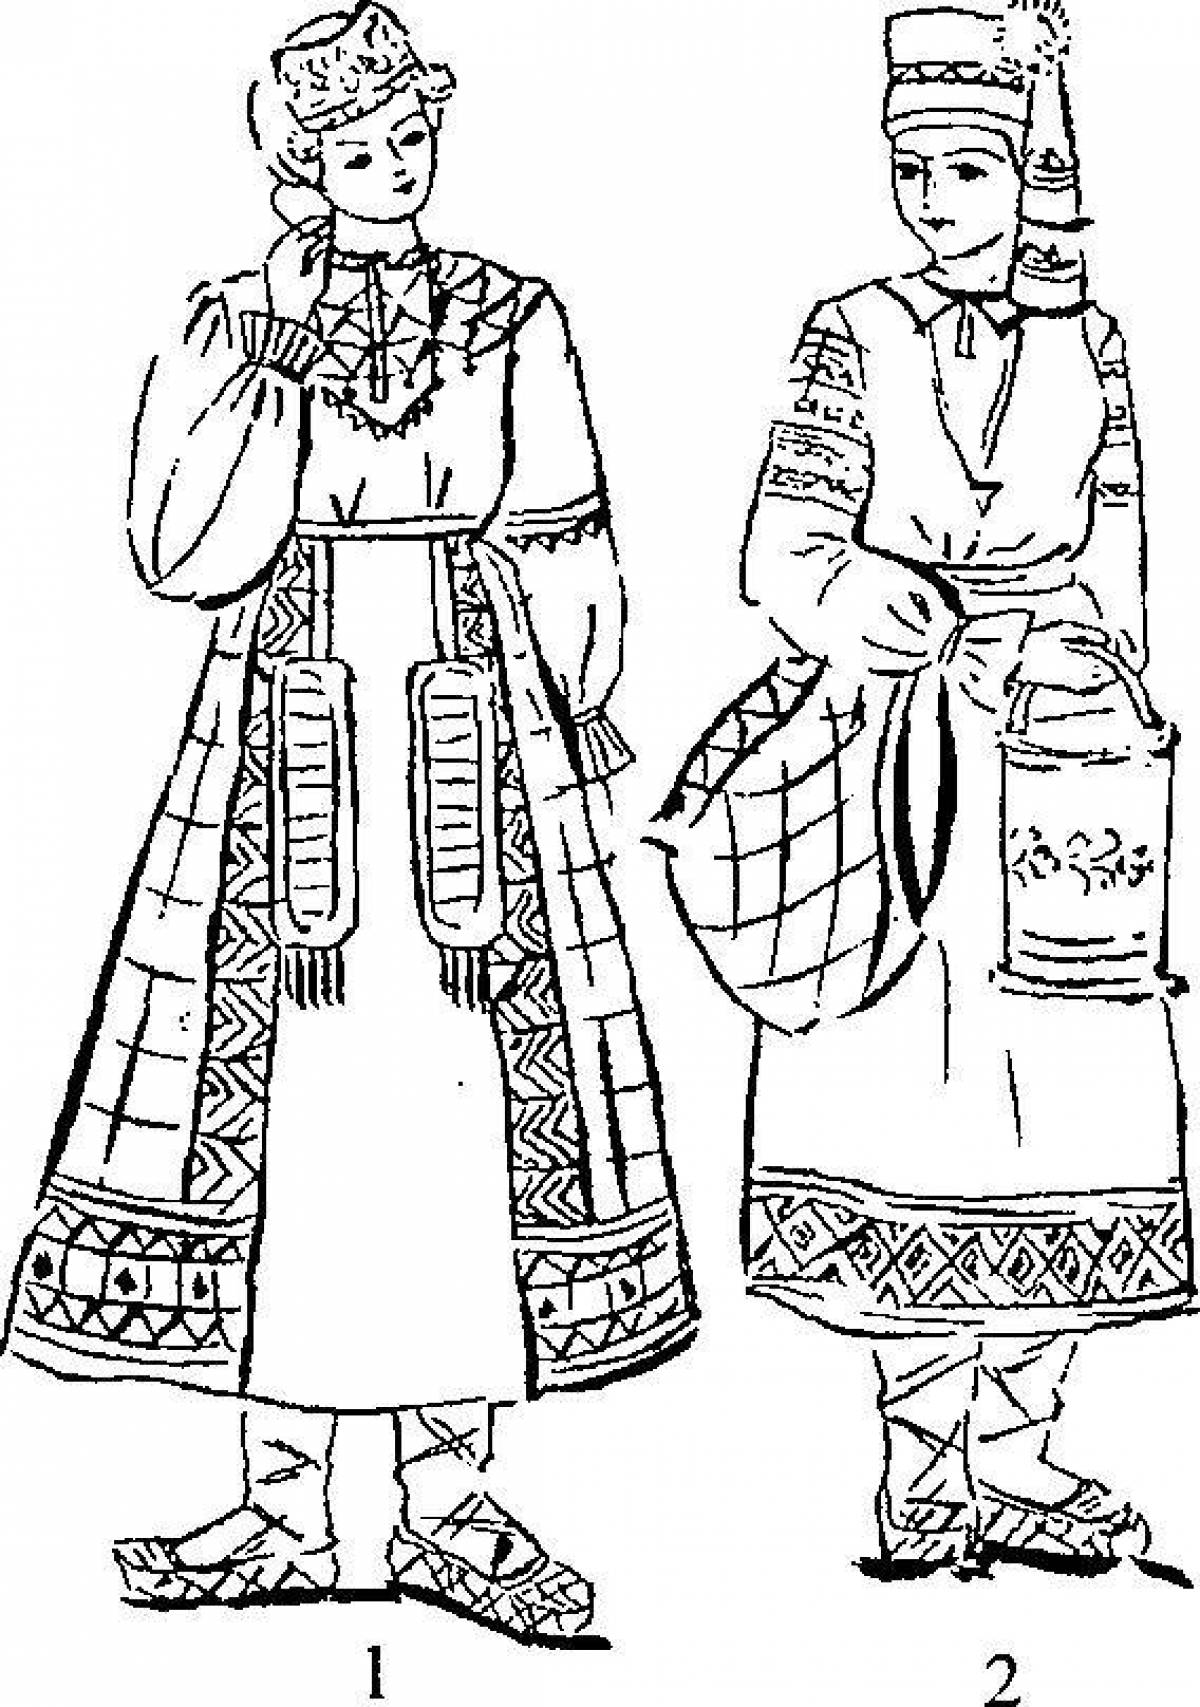 Coloring page colorful male Russian folk costume